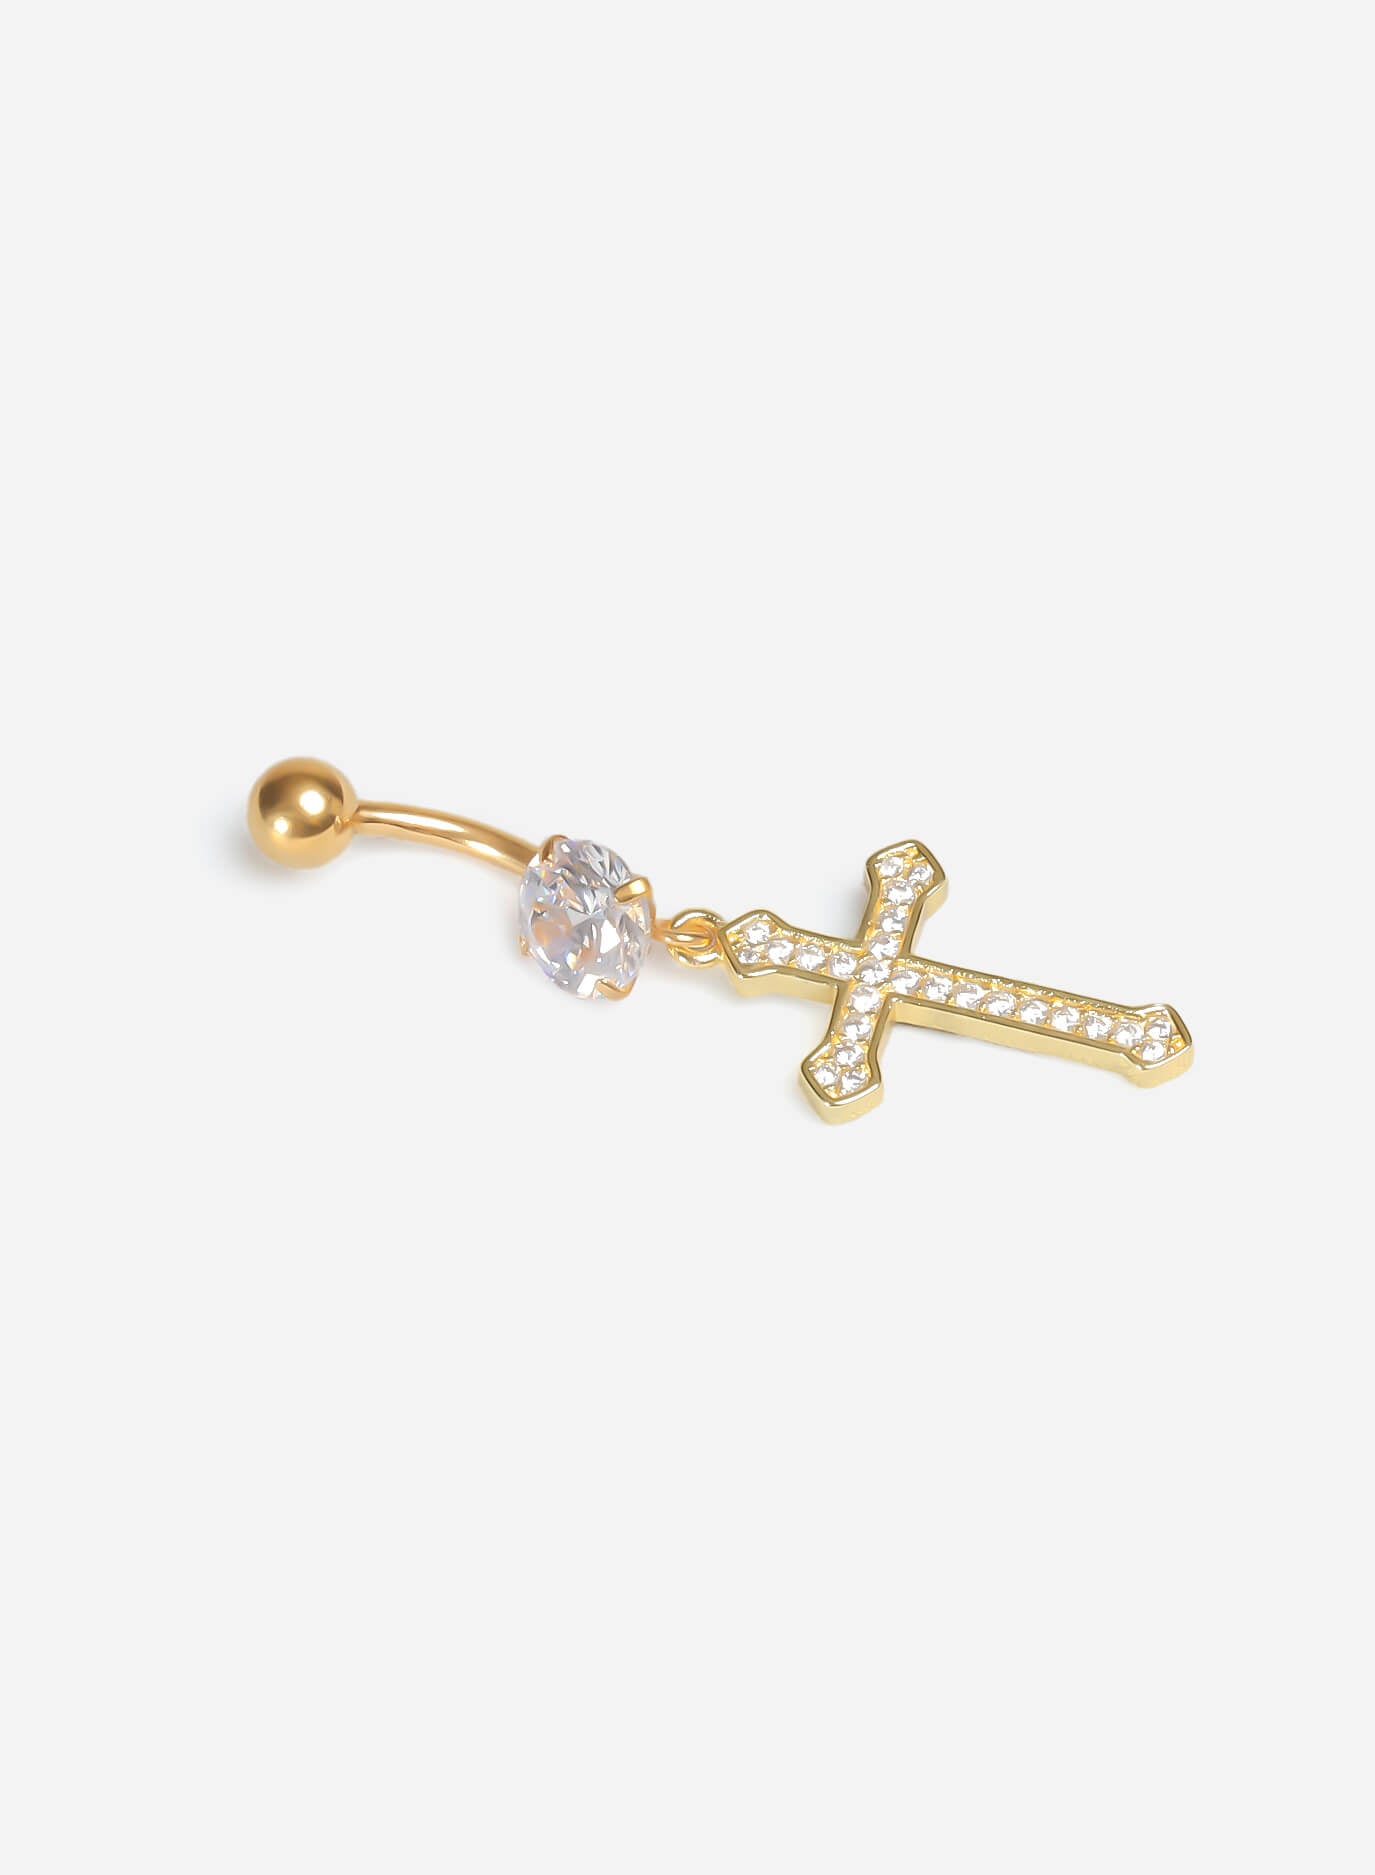 GD Cross Dangle Belly Ring - stainless steal